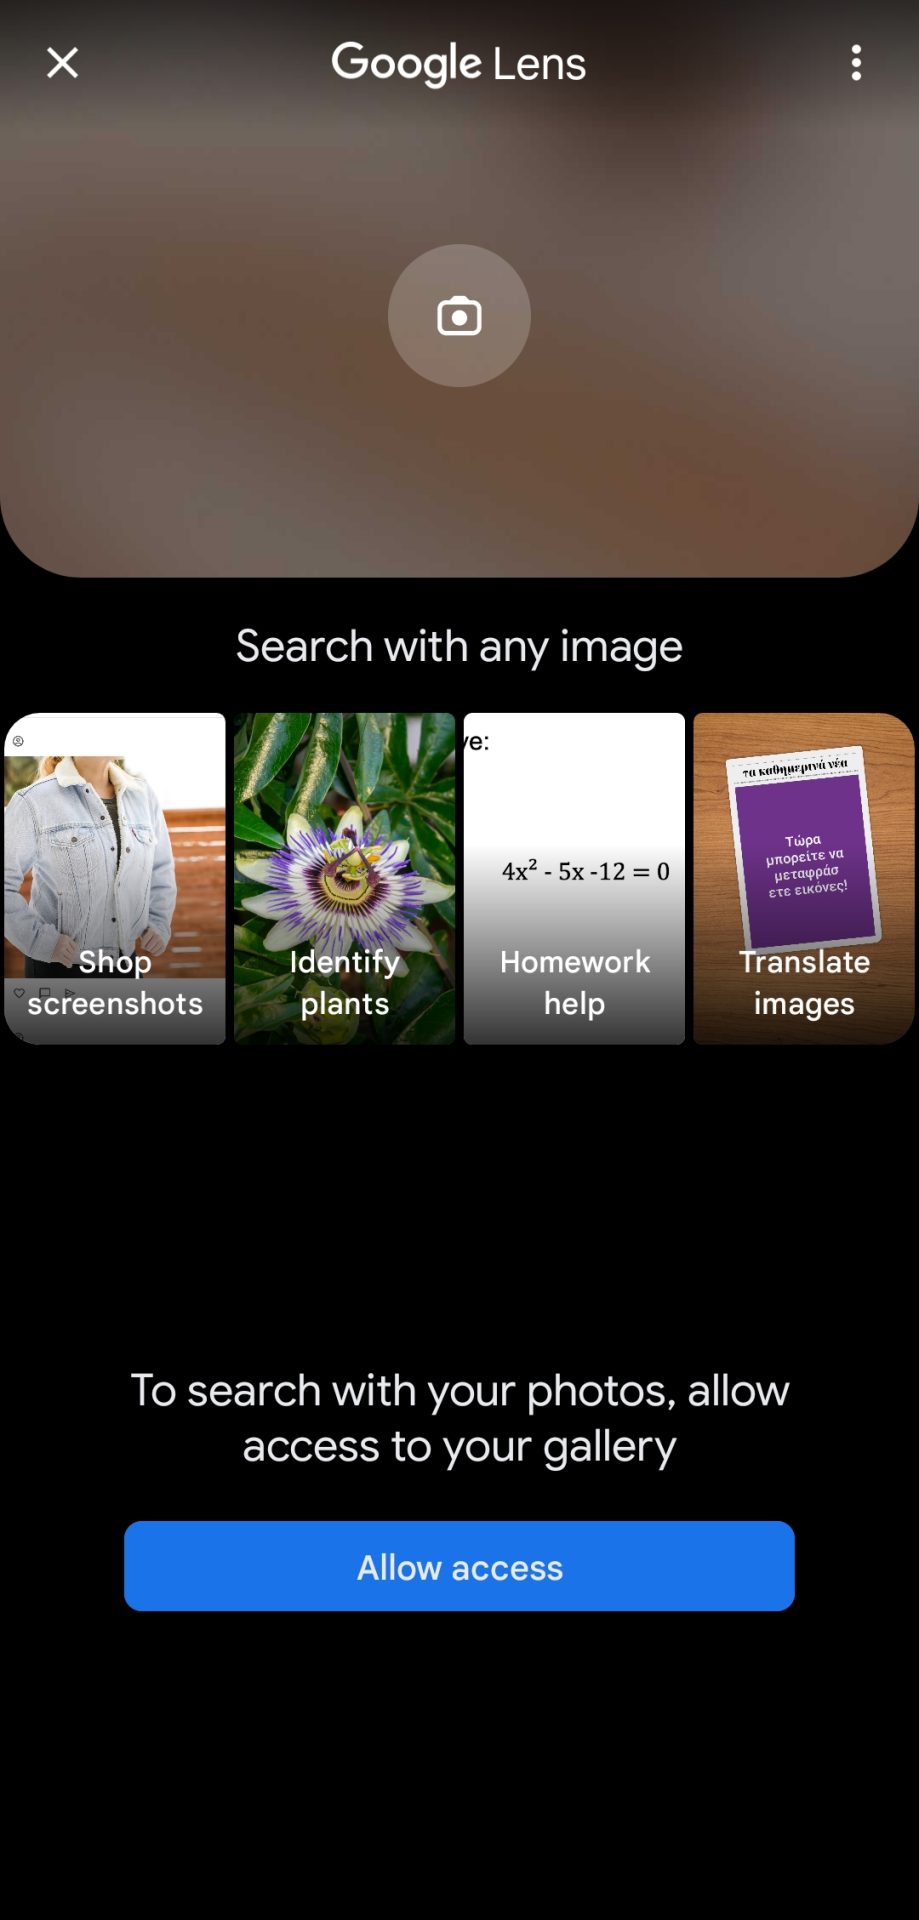 1- Search for the image saved on the phone